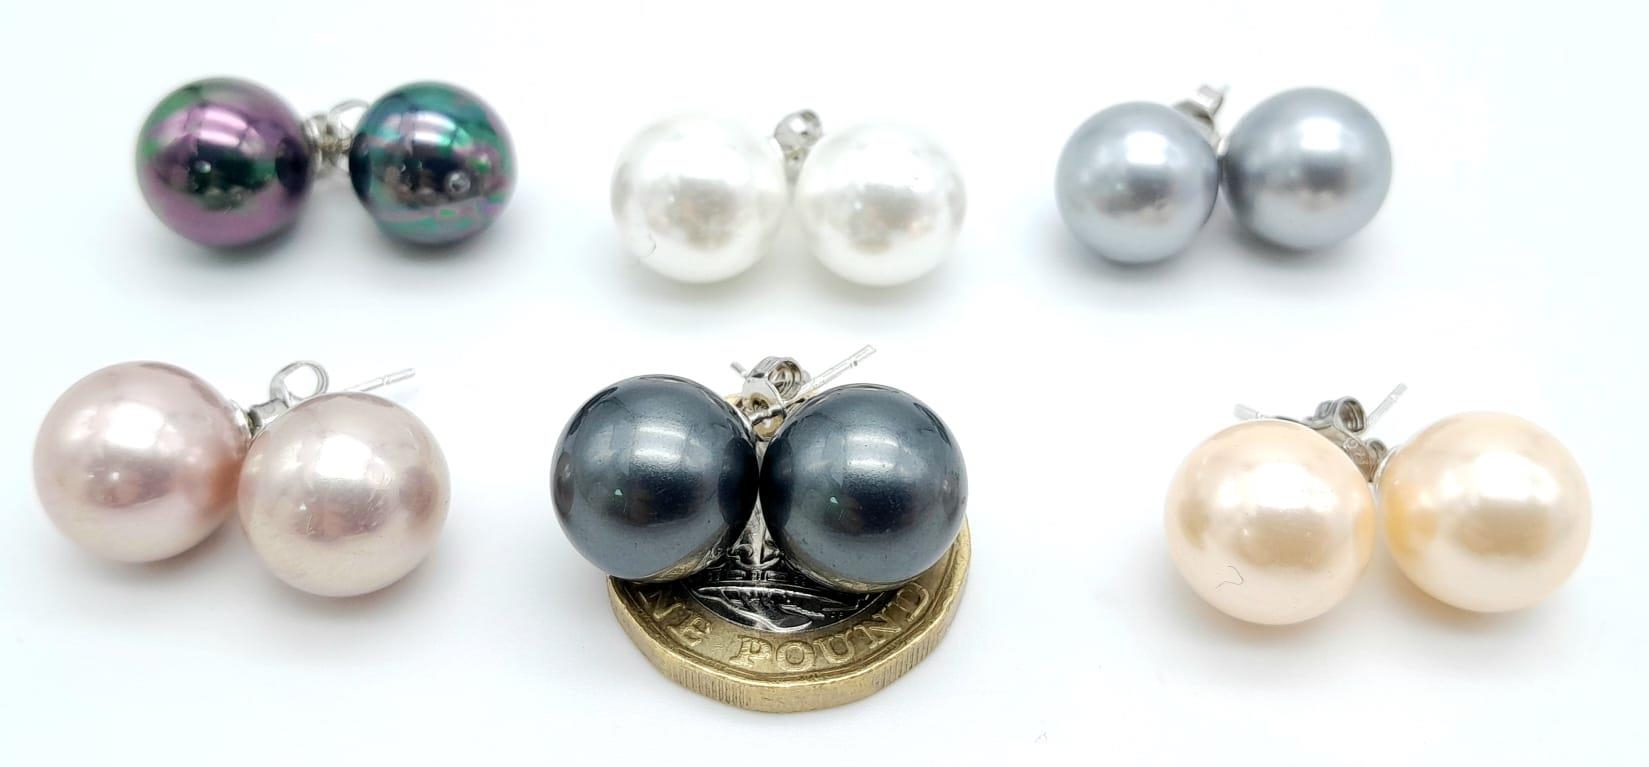 Six Pairs of Colourful Metallic South Sea Pearl Shell 12mm Bead Stud Earrings. Set in 925 silver. - Image 2 of 7